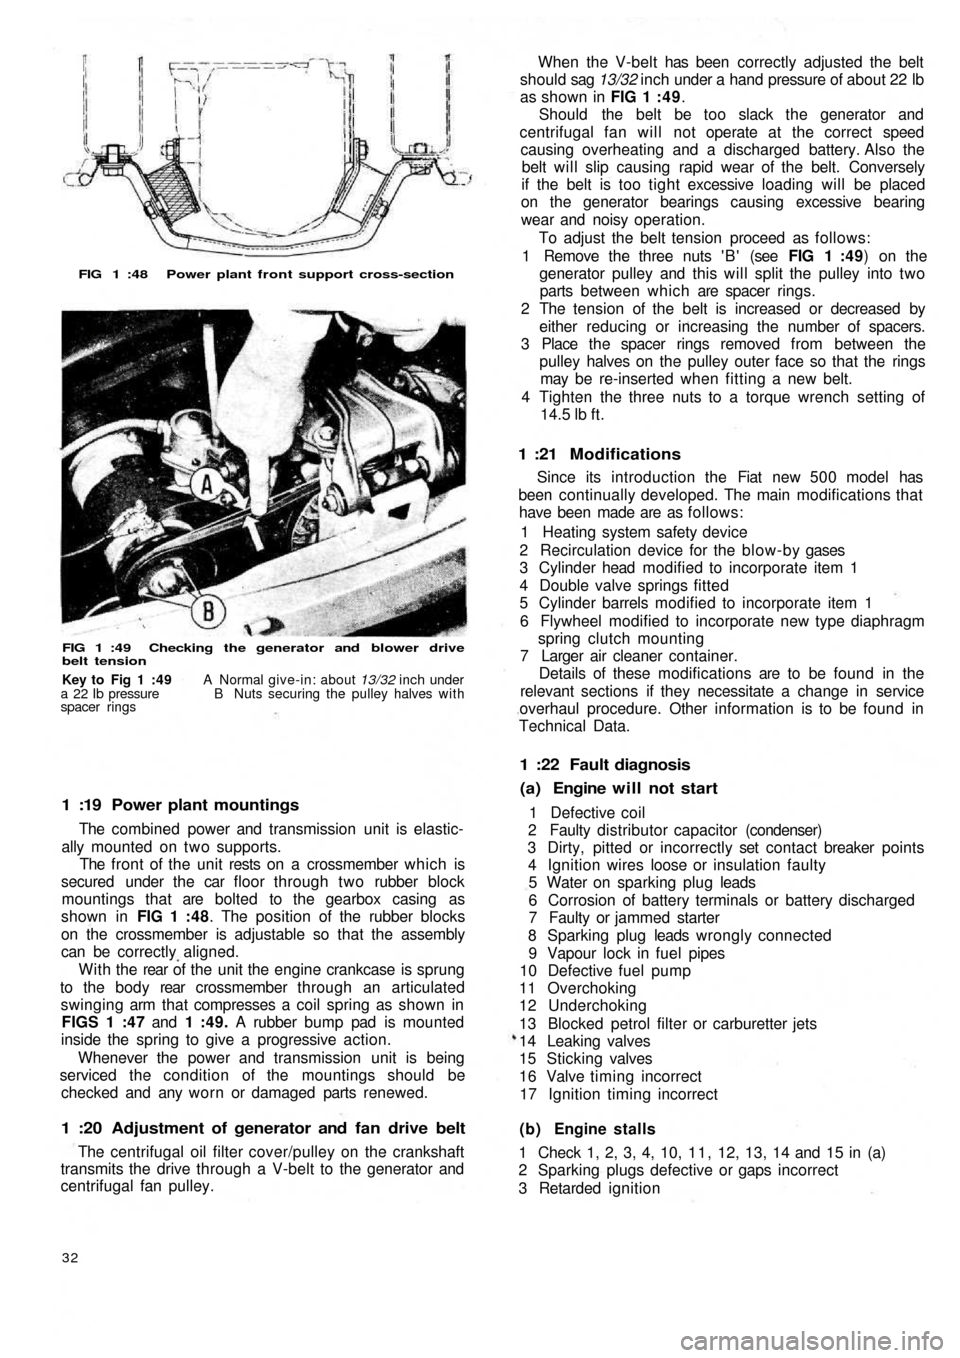 FIAT 500 1968 1.G Workshop Manual FIG 1 :48  Power plant front support cross-section
FIG 1 :49  Checking  the generator and  blower drive
belt tension
1 :19  Power plant mountings
The combined power and transmission unit is elastic-
a